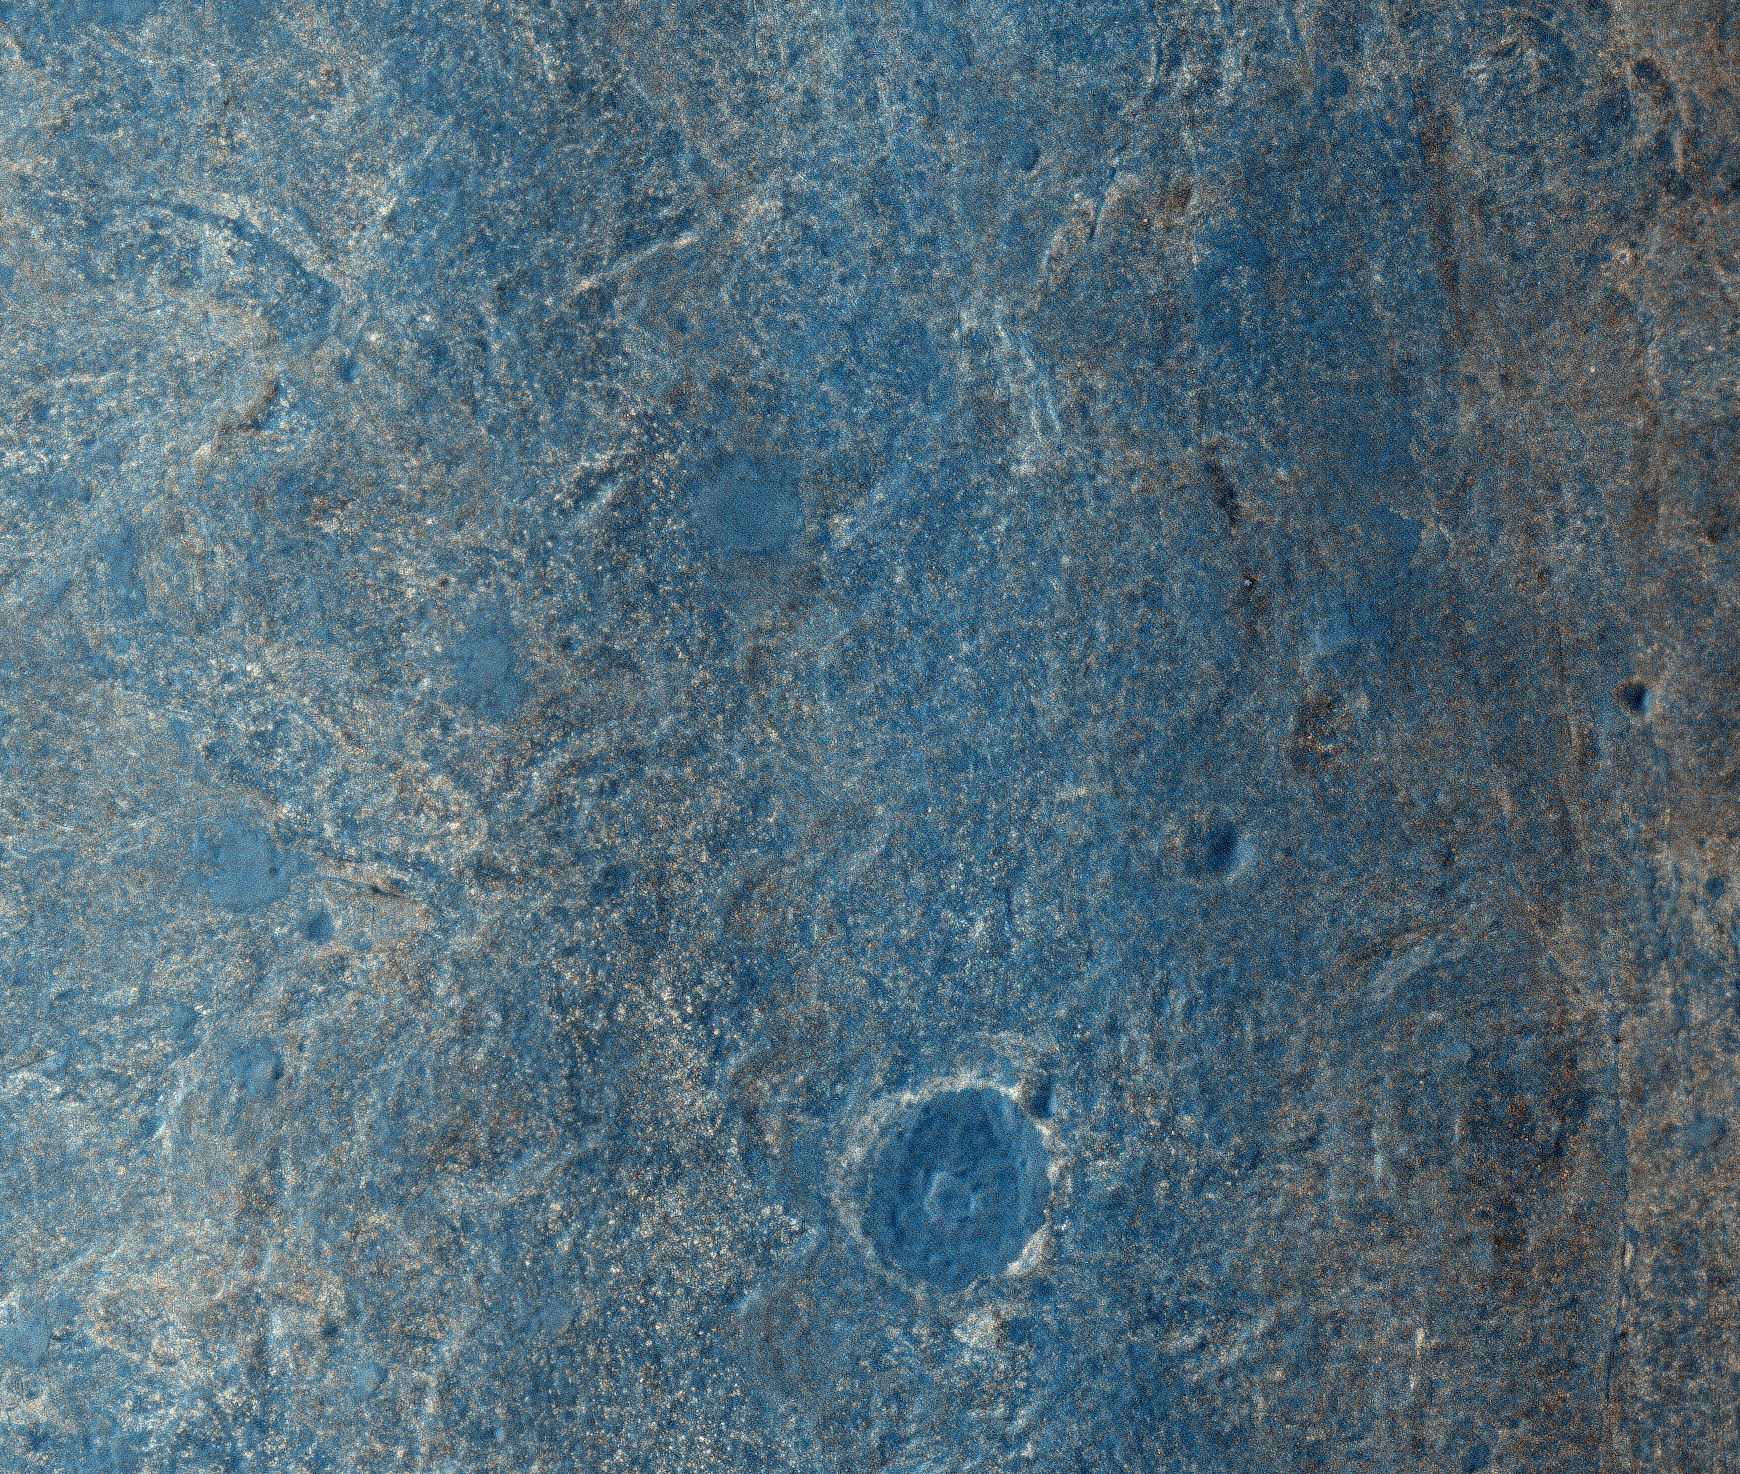 Botany Bay, relatively level ground on the surface of Mars between Cape York and Solander Point, taken by NASA's Mars Reconnaissance orbiter on July 7, 2013.